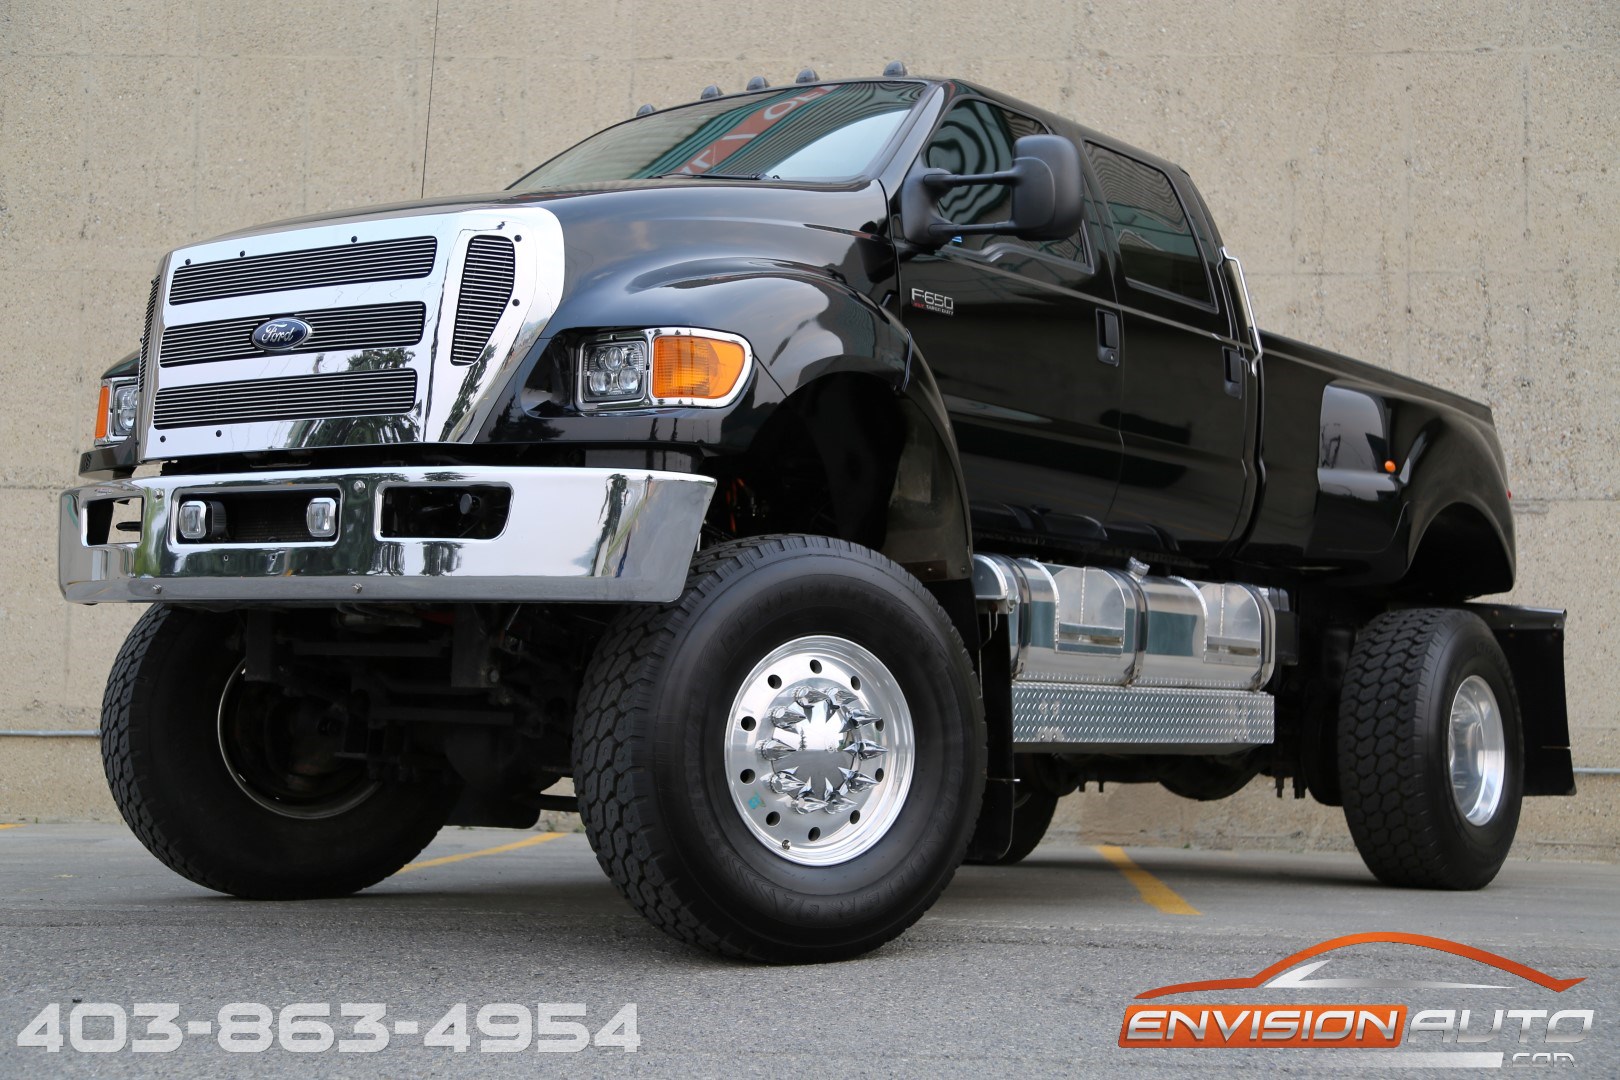 haynes manual for 2008 ford f350 super duty download